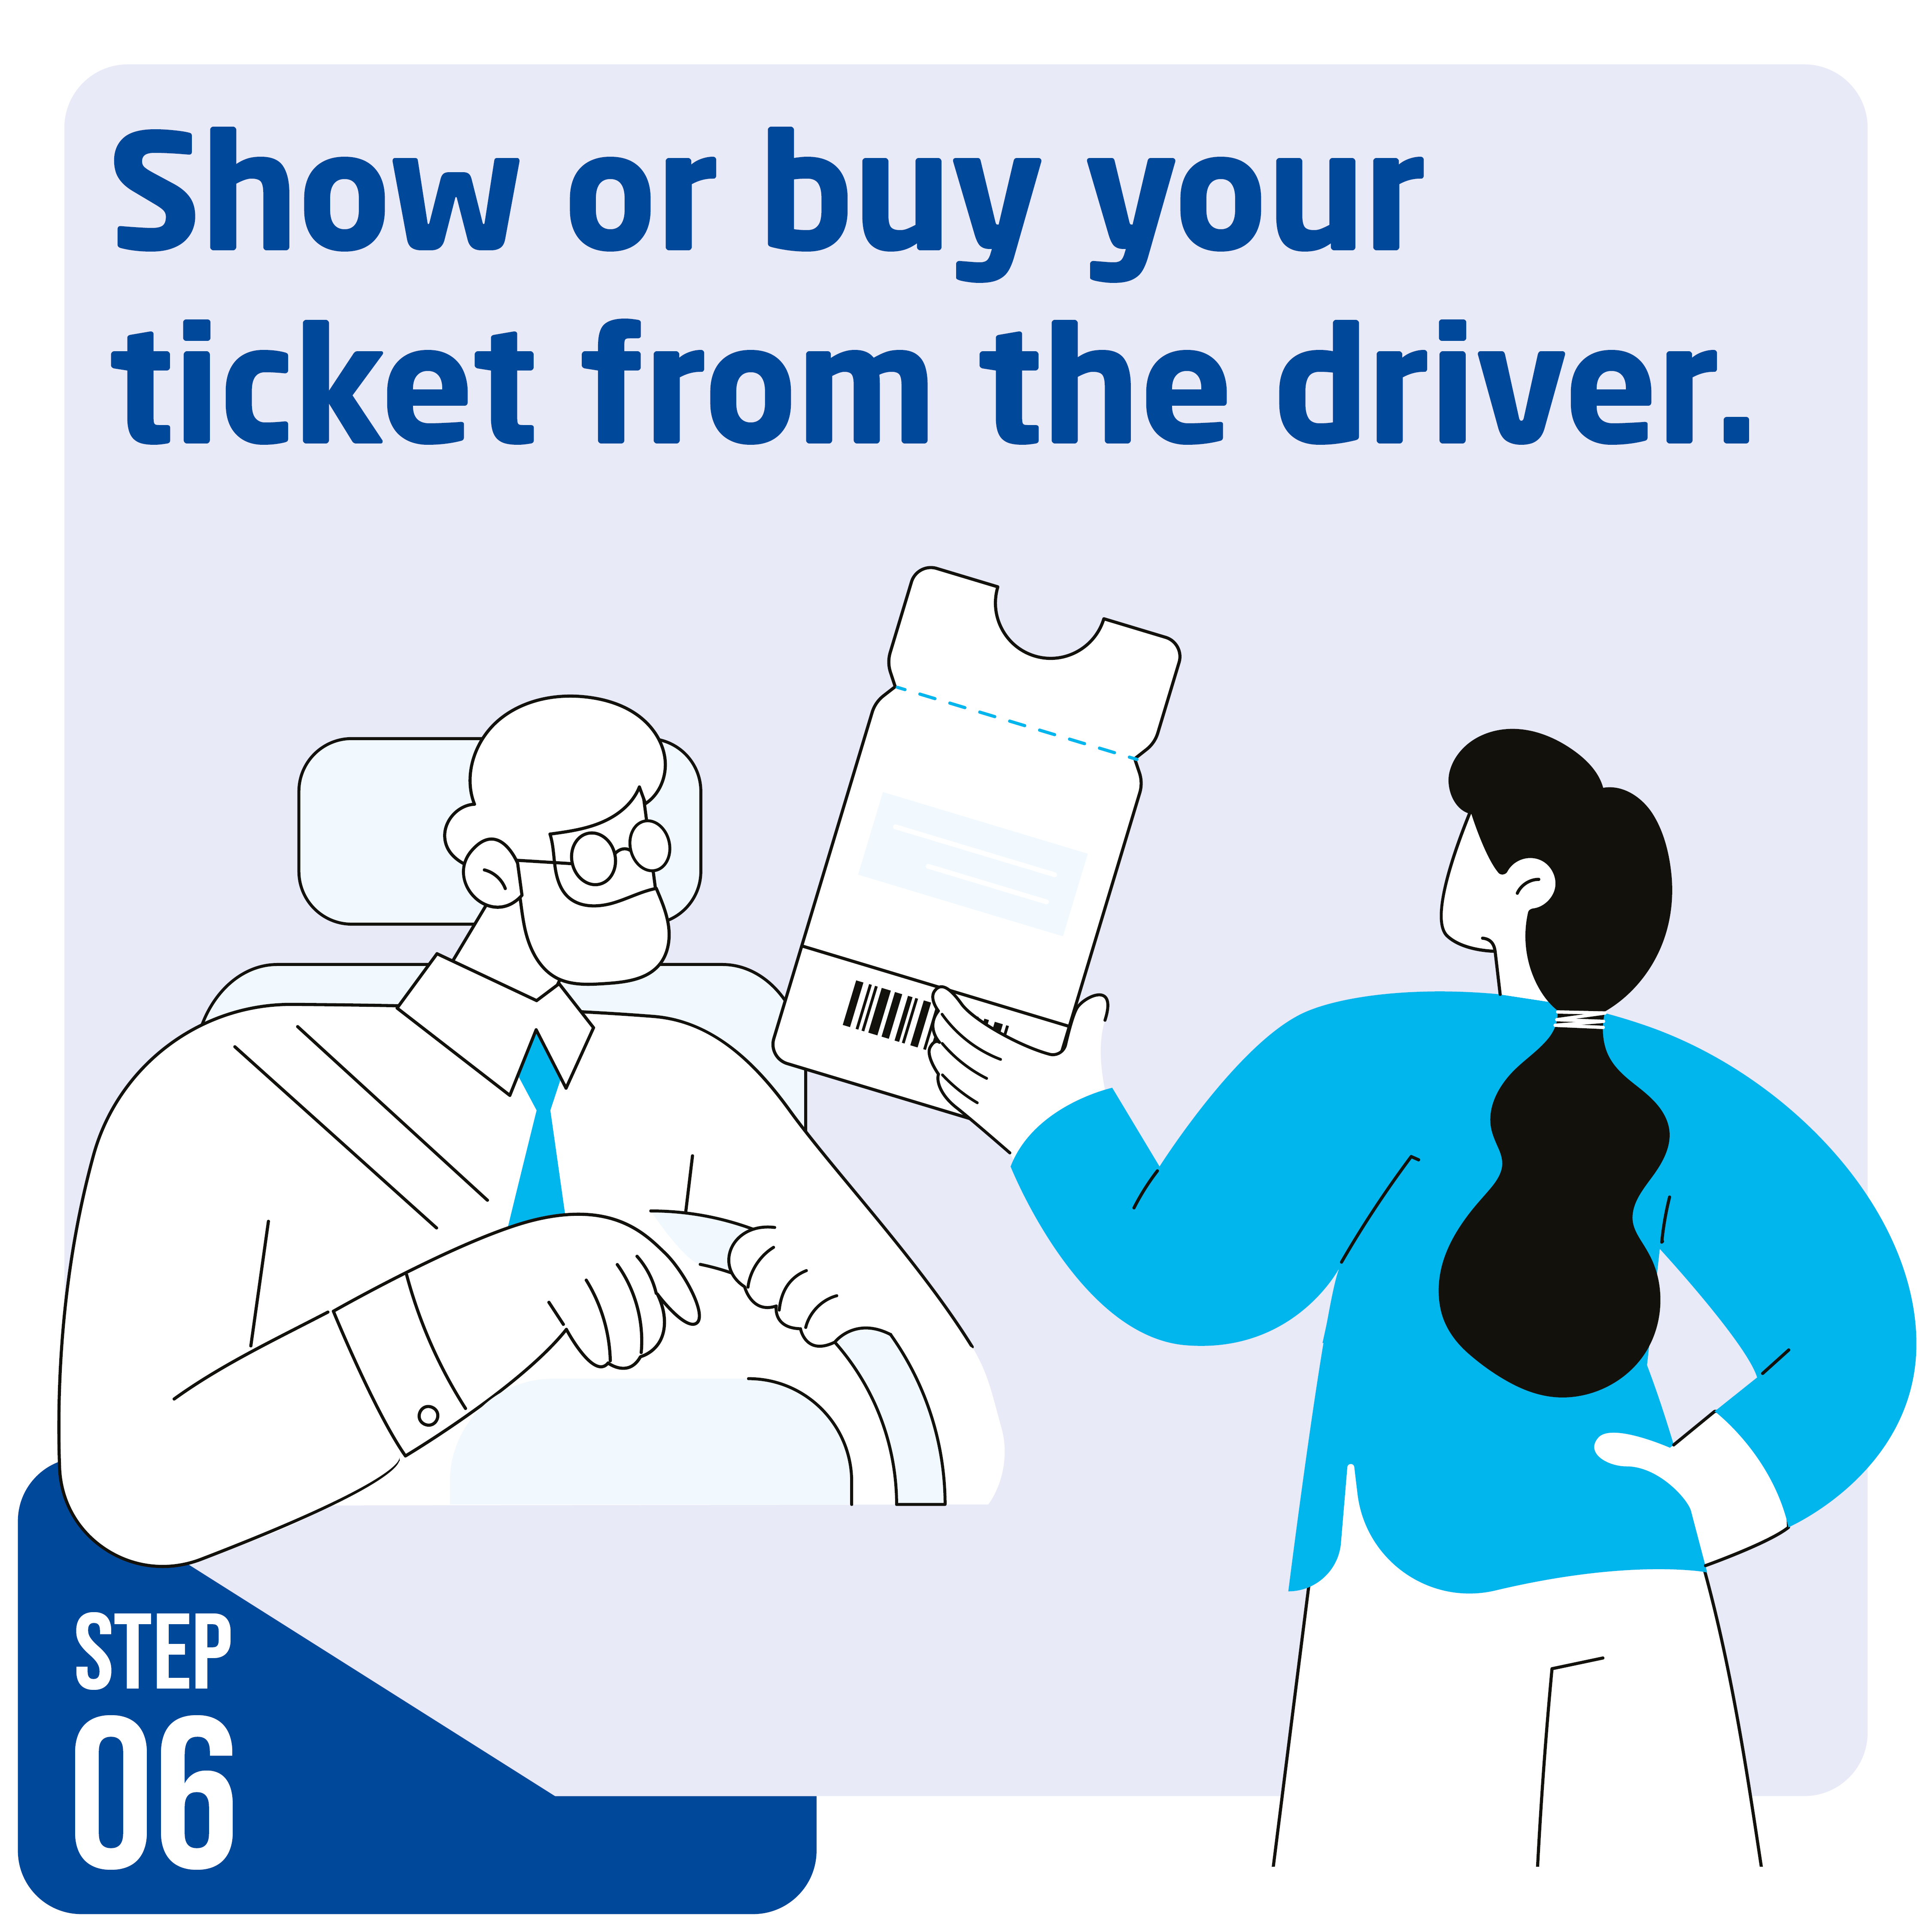 image of someone showing their bus ticket to the driver